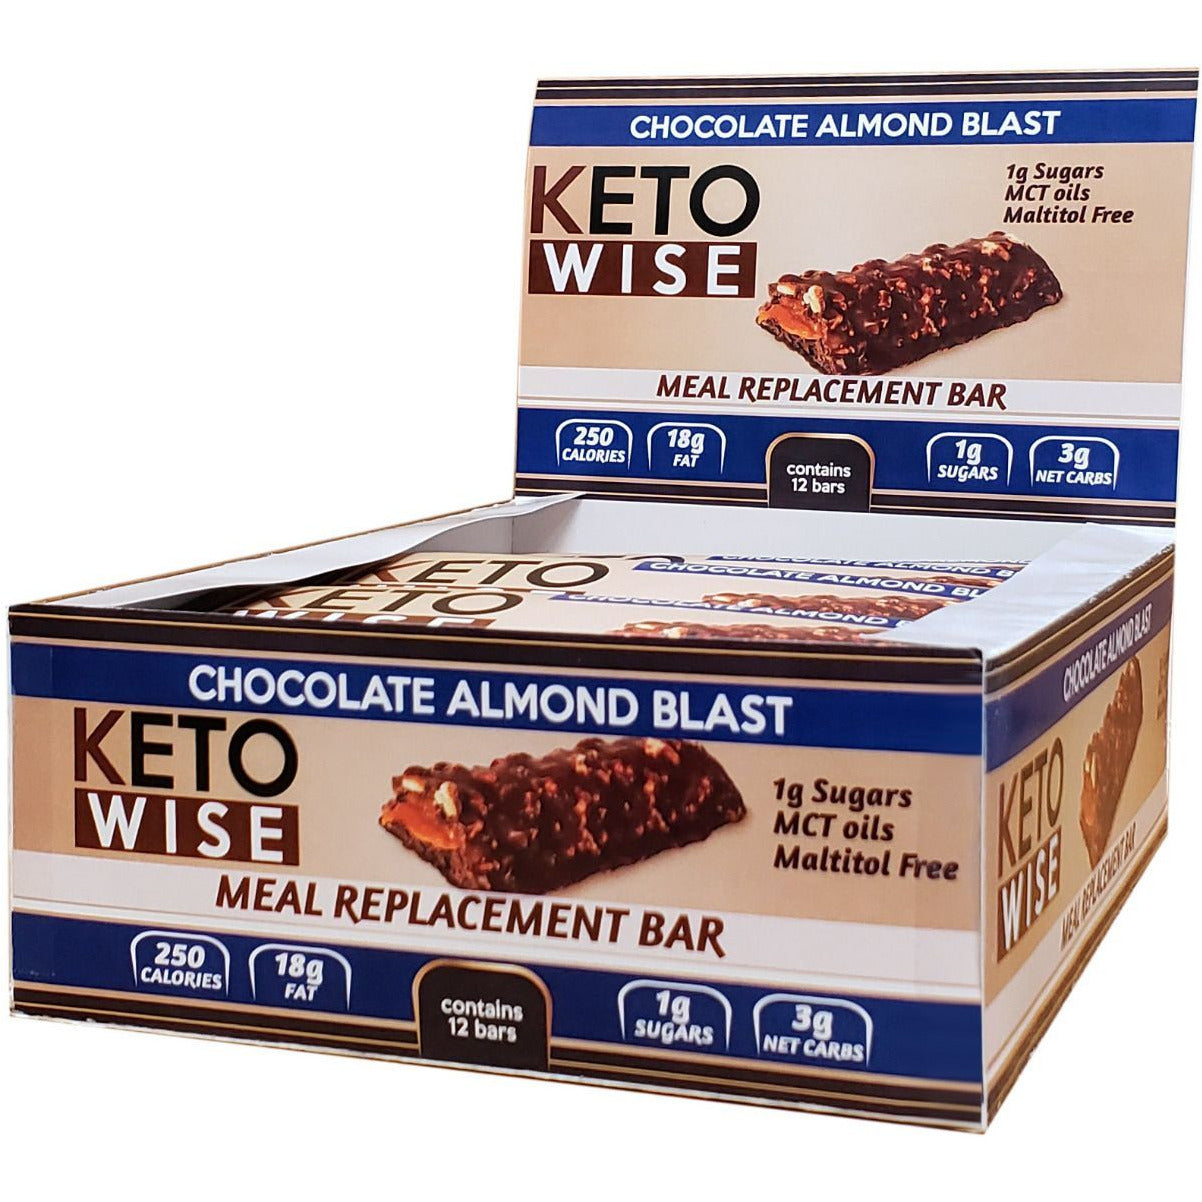 Keto Wise Meal Replacement Bar (1 bar) Food Chocolate Almond Blast,Chocolate Peanut Blast keto wise